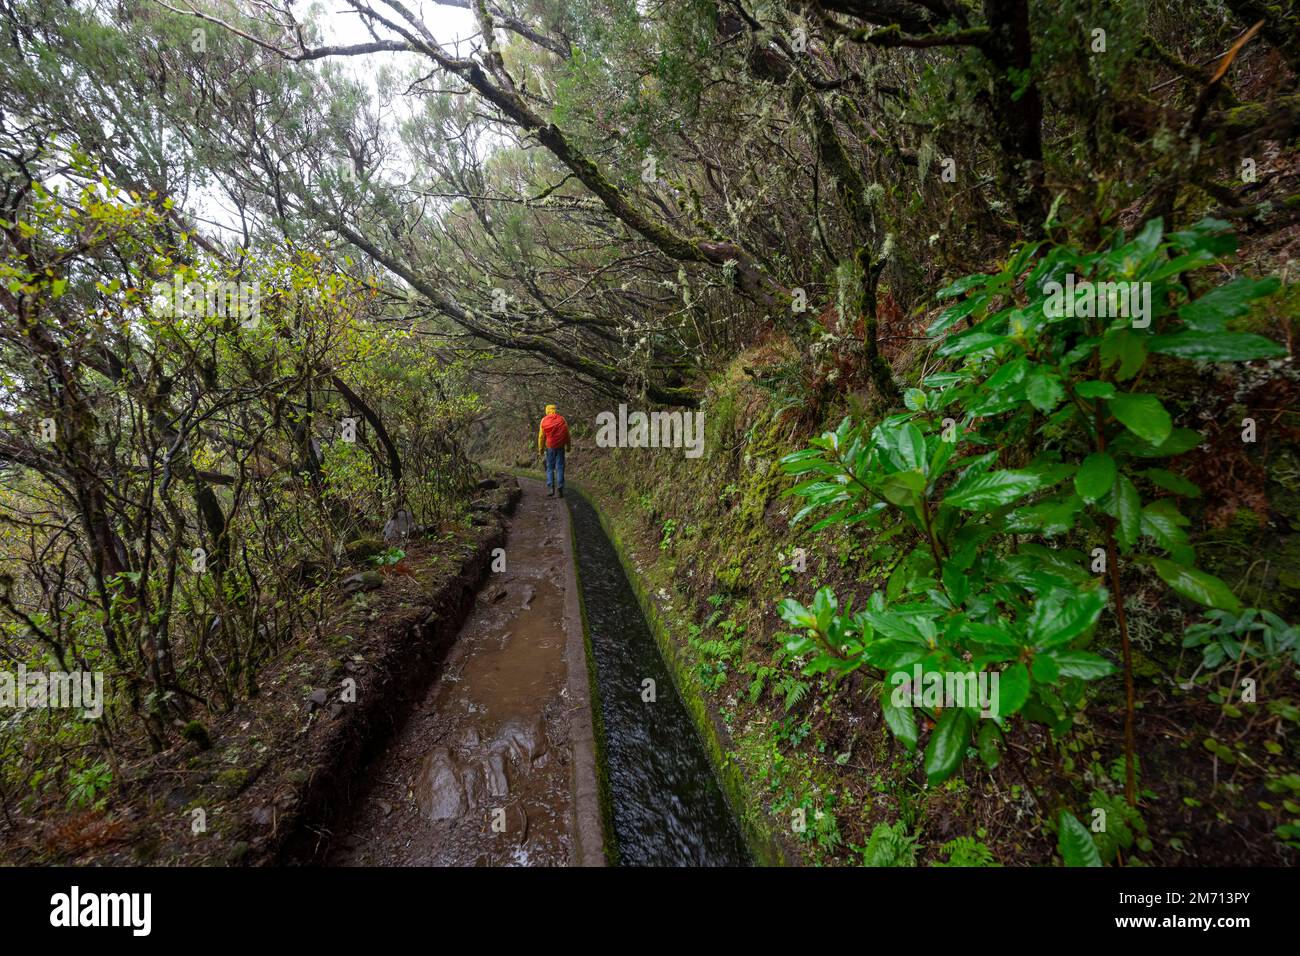 Hiker between densely growing forest at a water channel, at the hiking trail at Levada do Alecrim, Rabacal, Paul da Serra, Madeira, Portugal Stock Photo